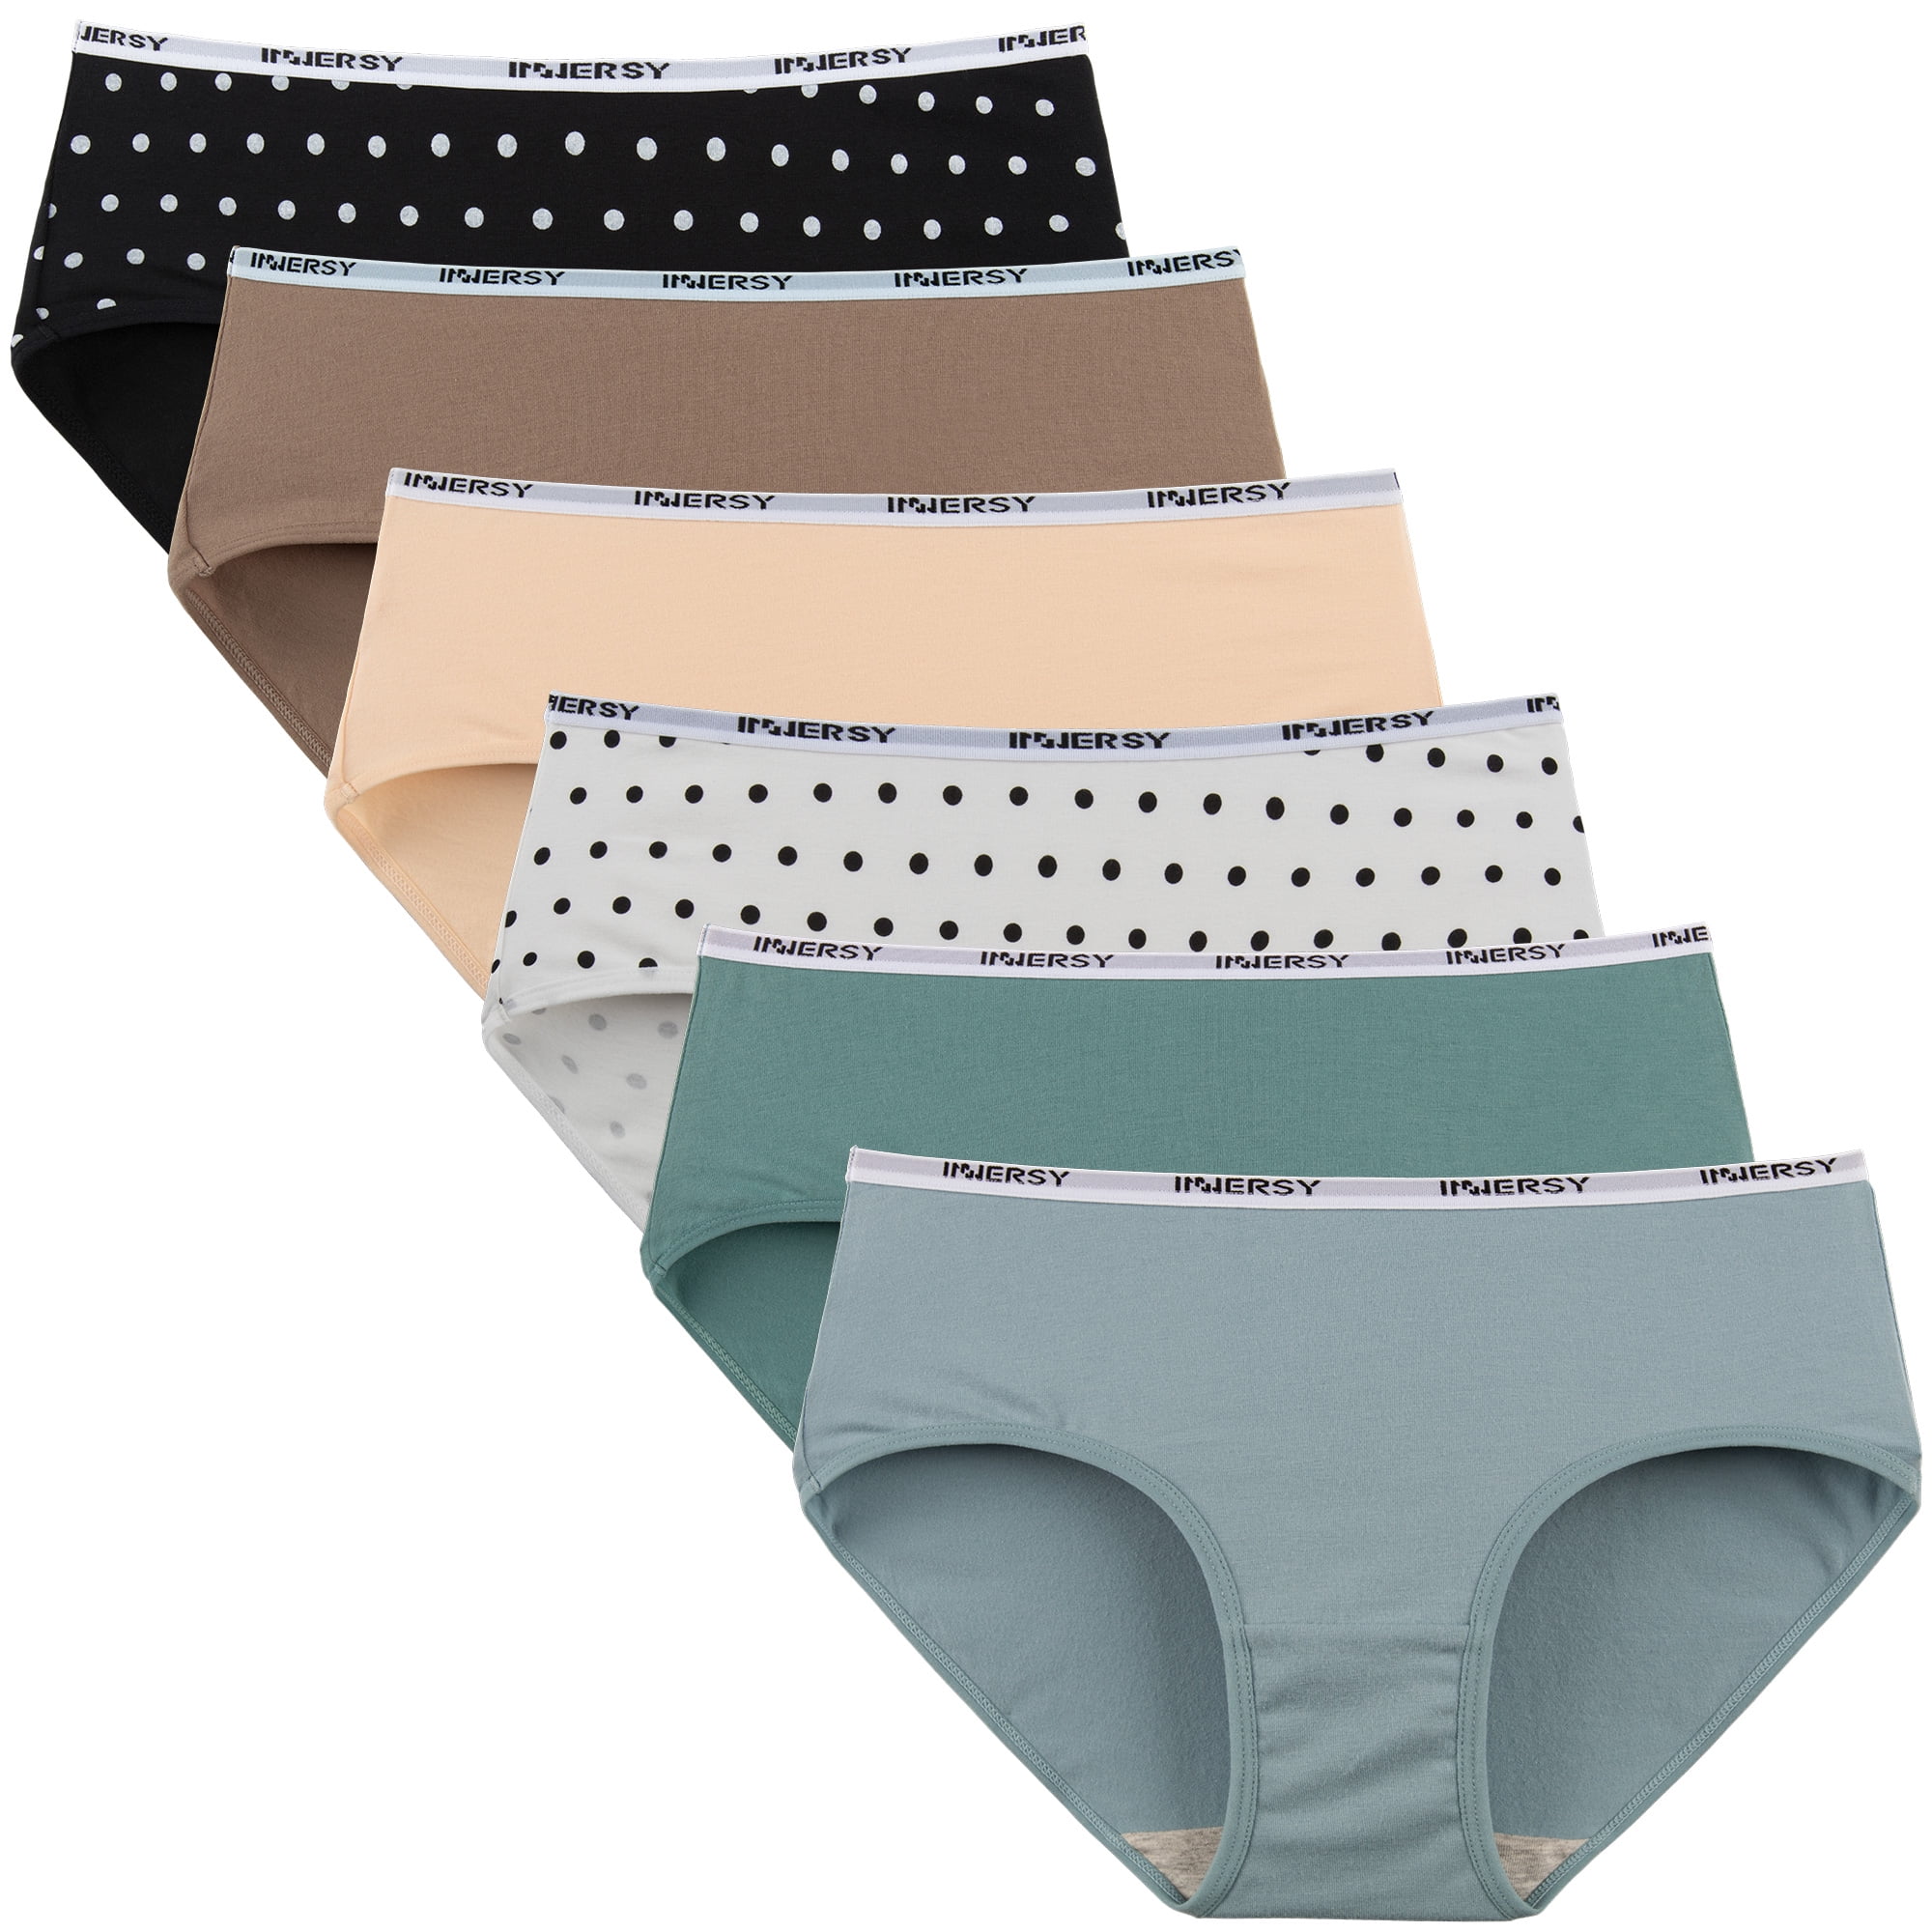 INNERSY Womens Underwear Cotton Hipster Panties Low Rise Basics Underwear  Set 6-Pack (Large, Early Fall) 